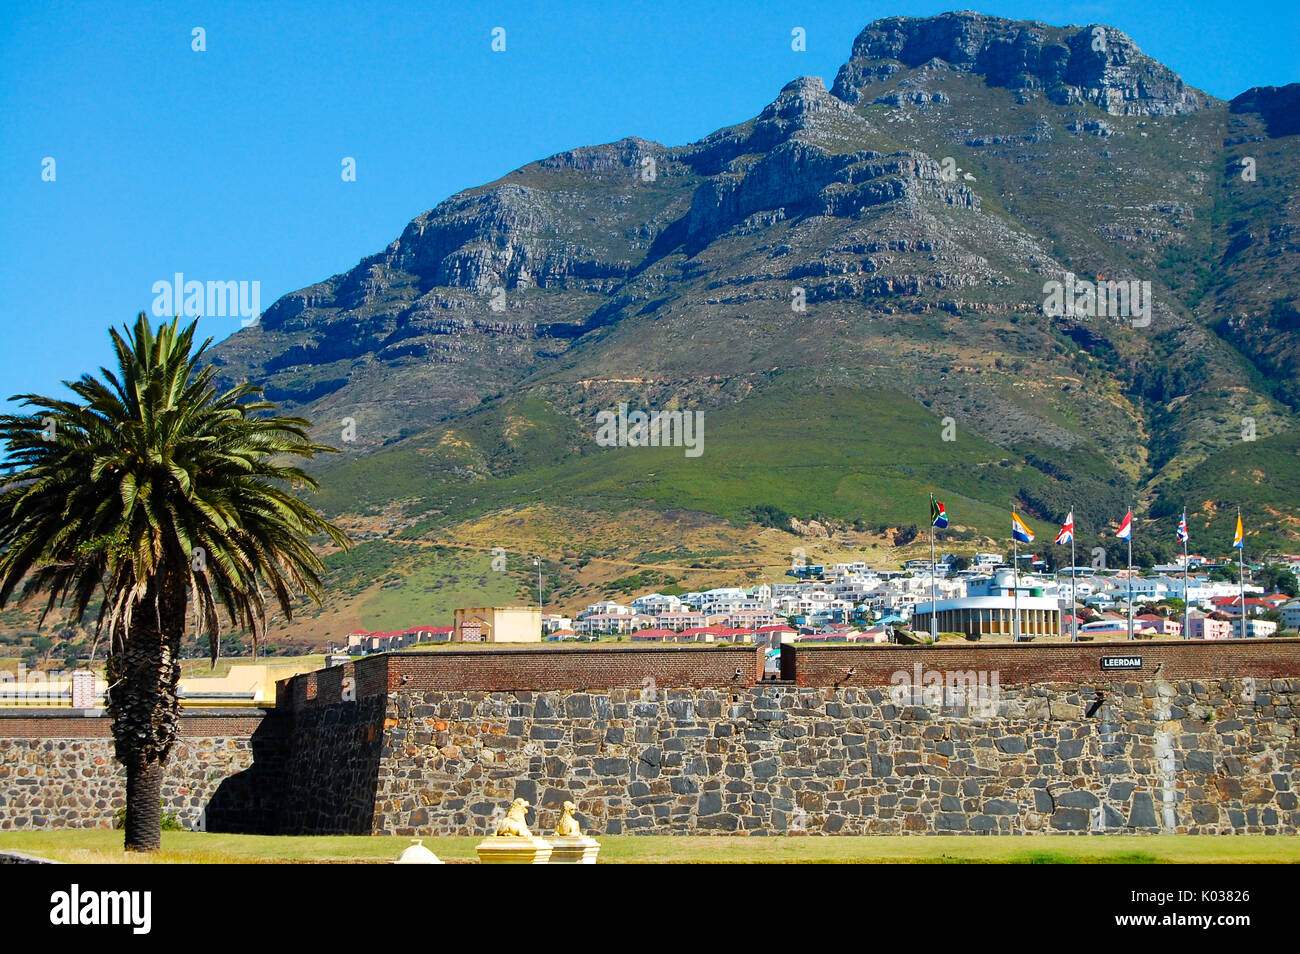 Castle of Good Hope Outer Walls - Cape Town - South Africa Stock Photo